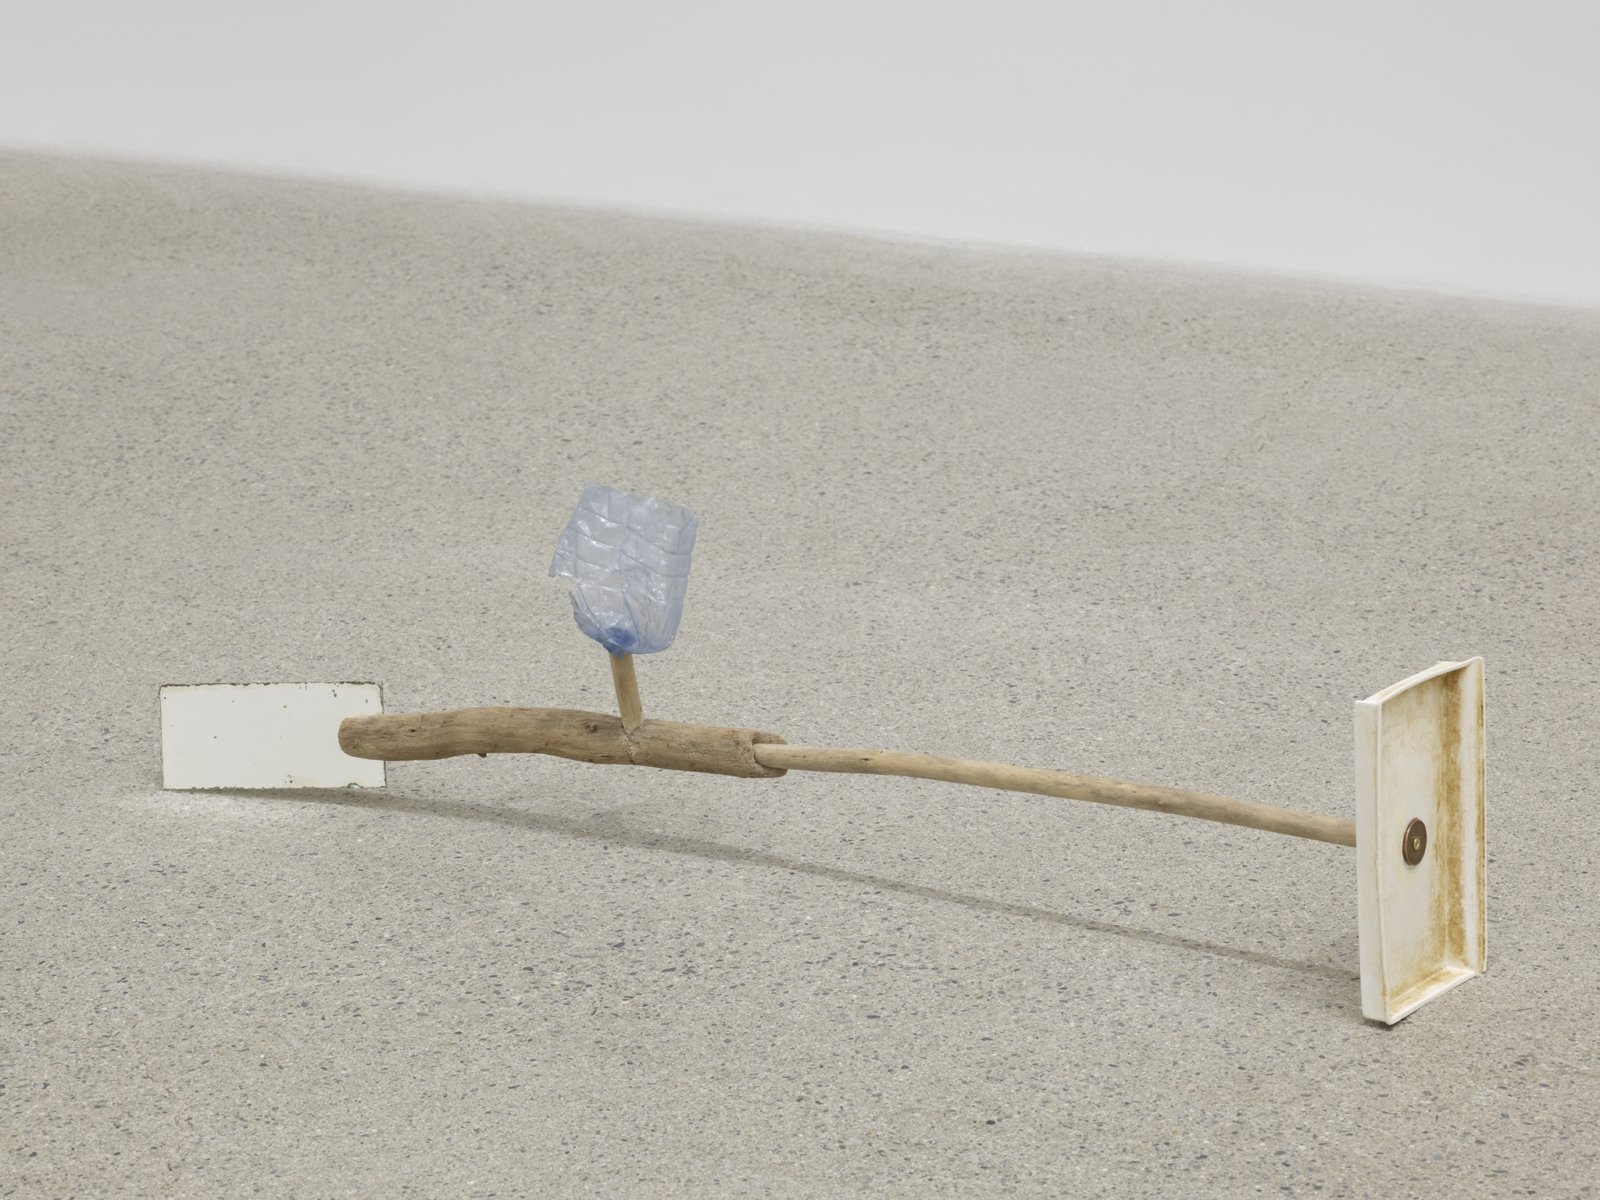 Ashes Withyman, Under a mouldy sky (spent tire, slab of stone, torn barbed wire fence), 2019, branches, margarine container base, penny, portion of water bottle, mirror, 7 x 26 x 4 in. (18 x 66 x 10 cm)